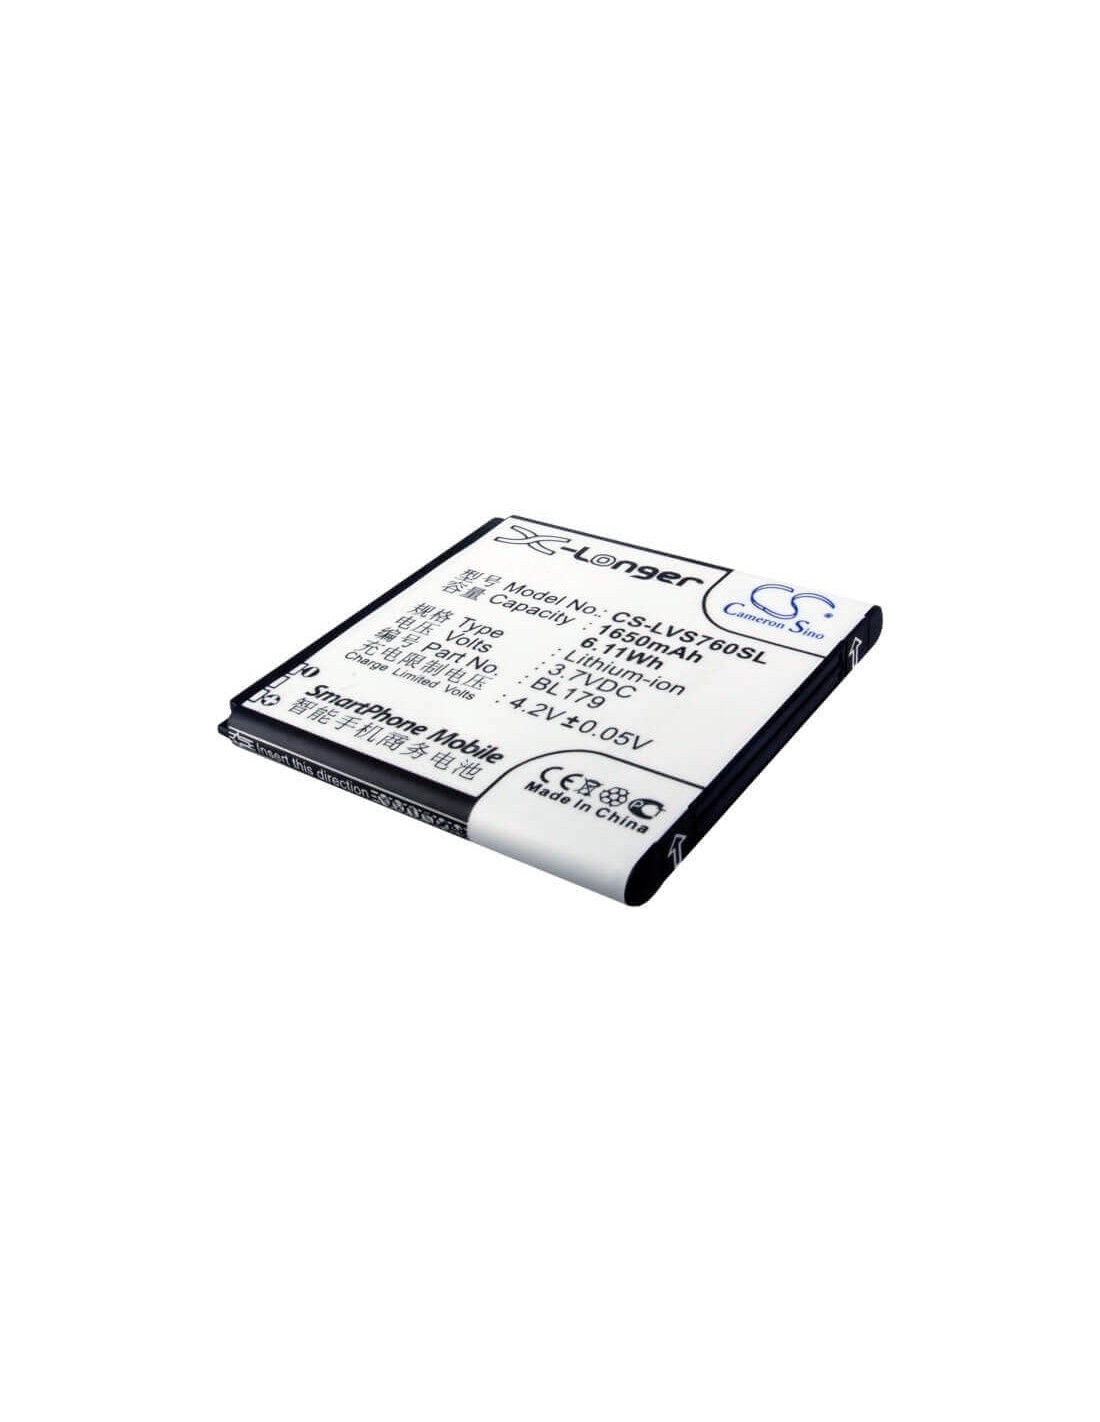 Battery for Lenovo A288t, A690, A698T 3.7V, 1650mAh - 6.11Wh